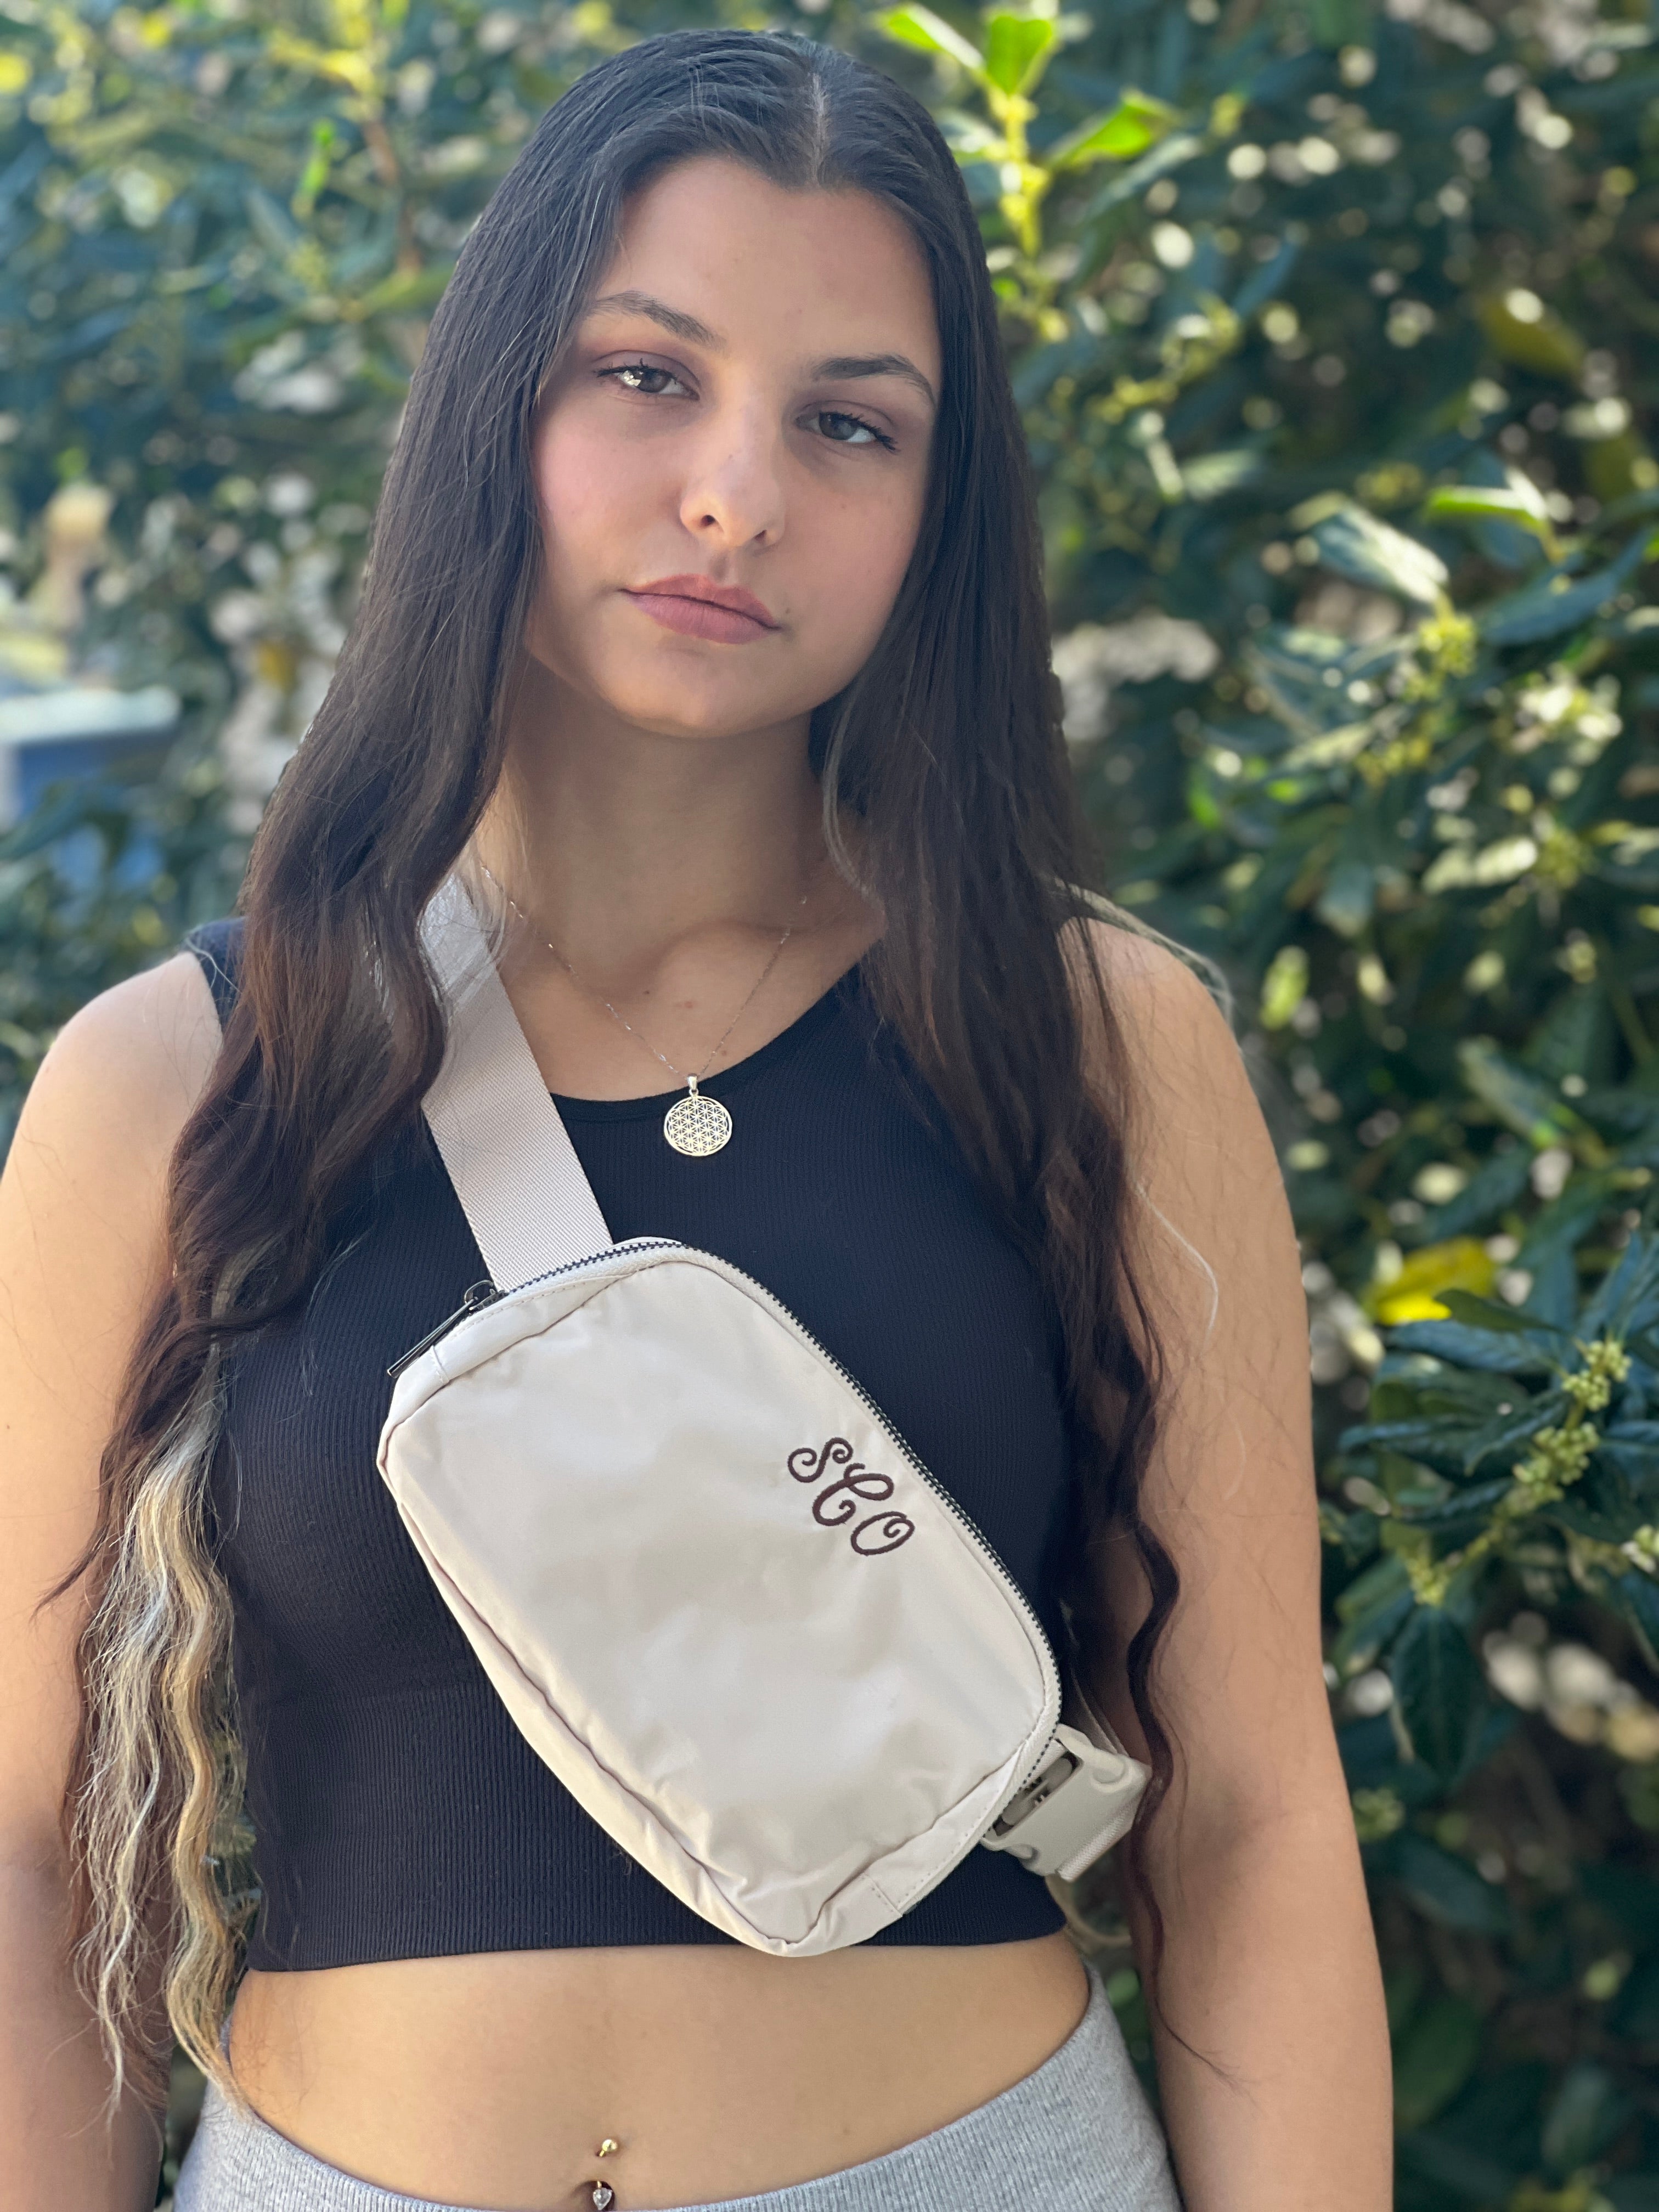 Waist & cross-body bags: 5512 grey Waist bag for mobile devices